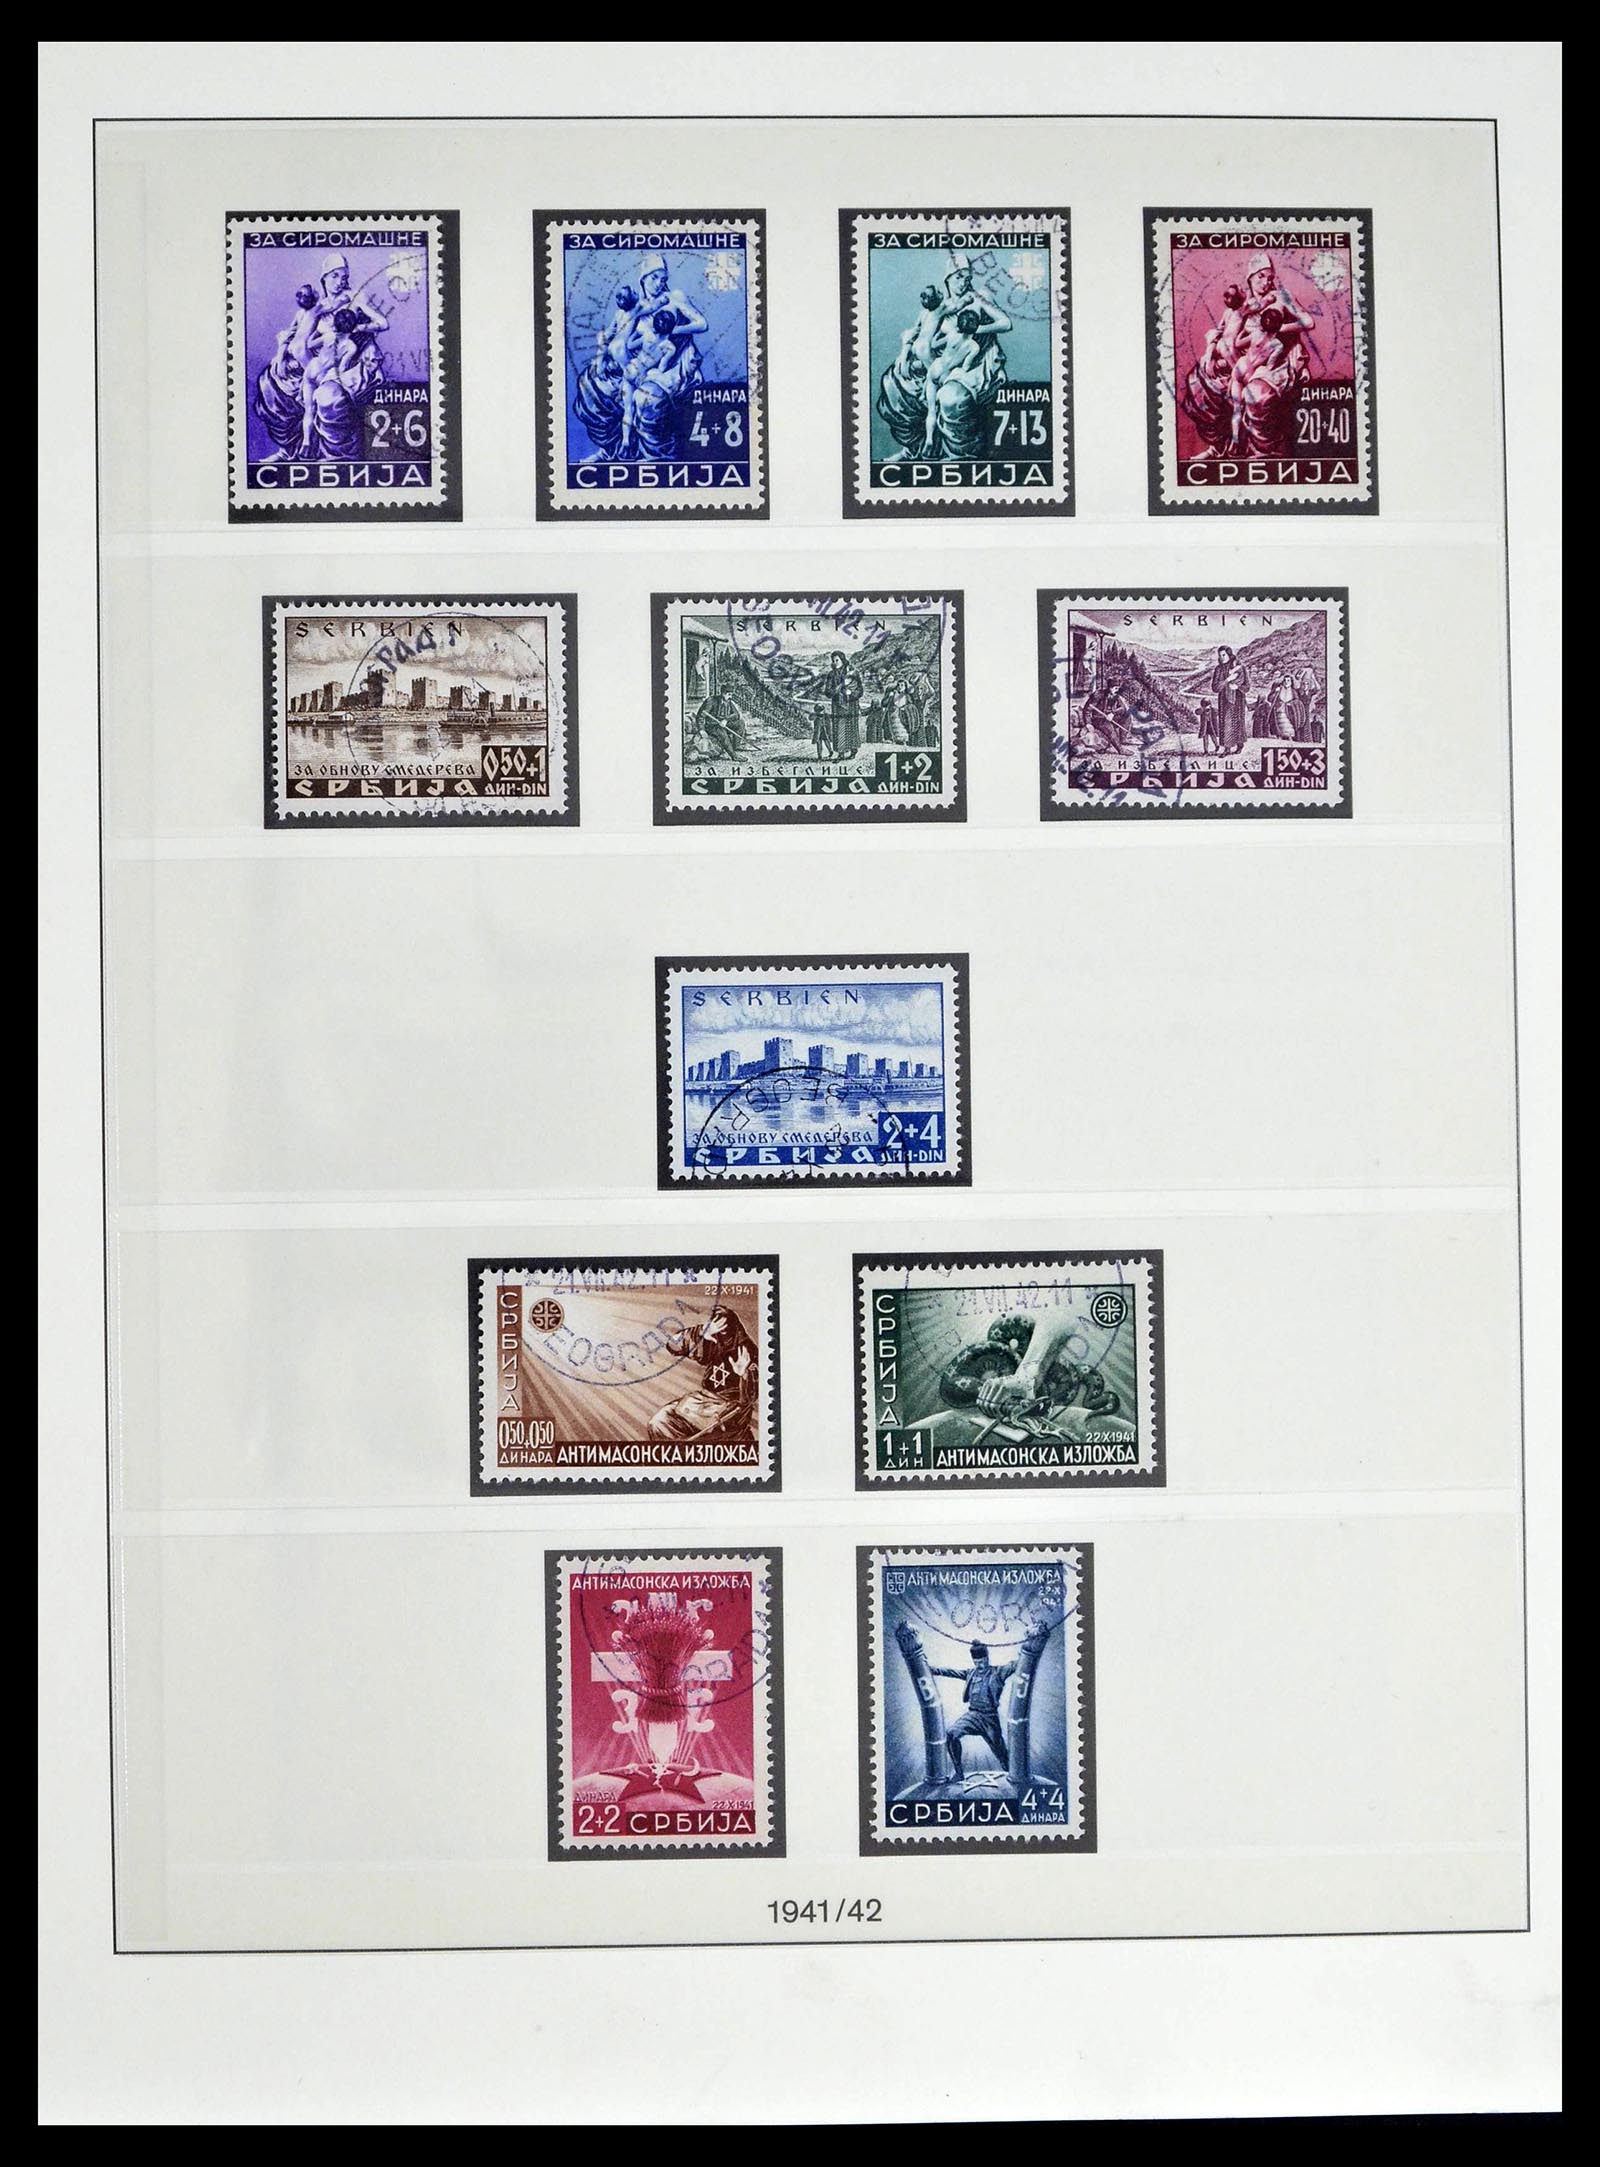 39396 0021 - Stamp collection 39396 German occupation WW II 1939-1945.